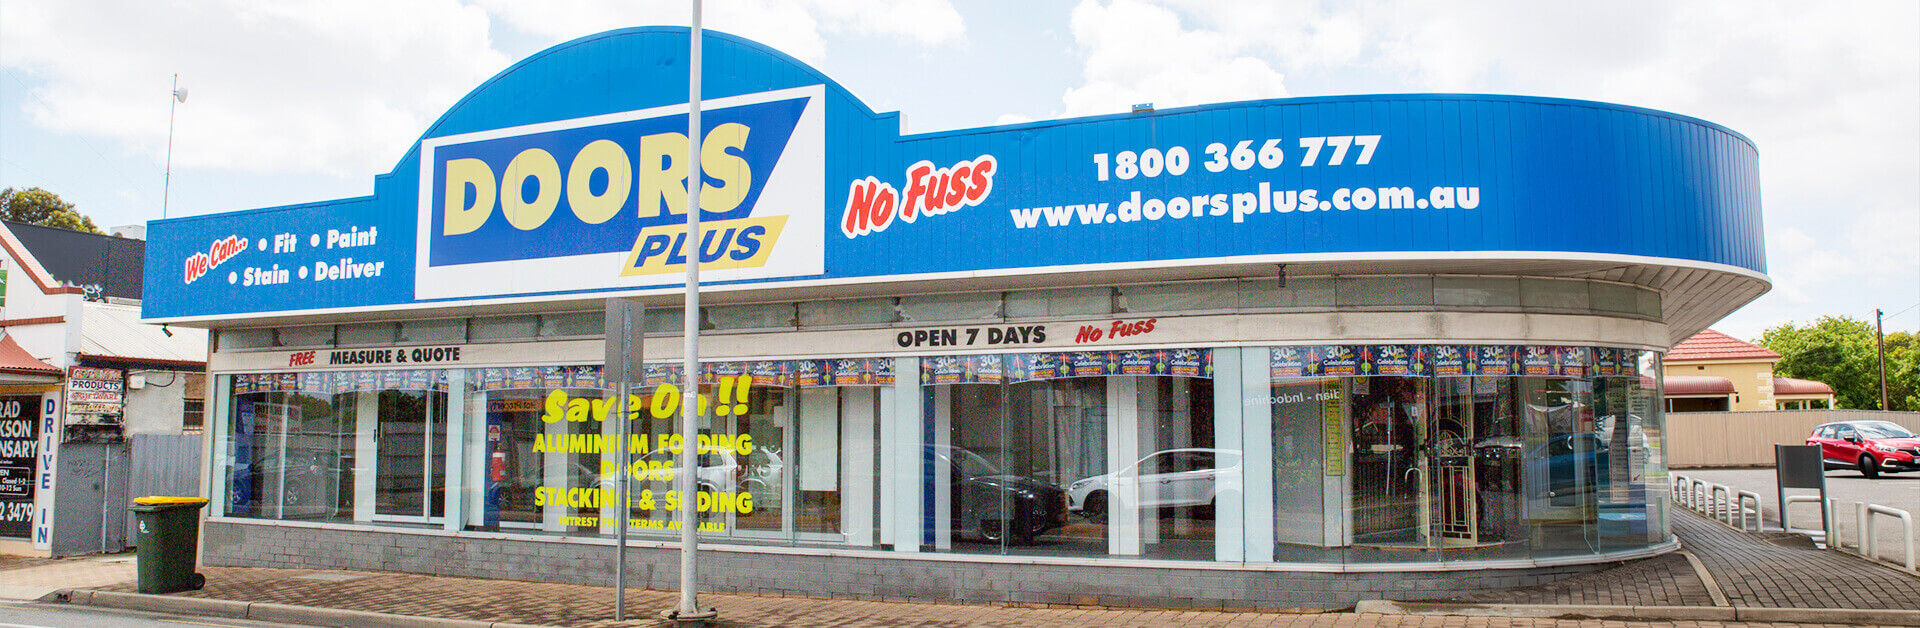 Doors Plus Sefton Park Store in Adelaide, South Australia with car parking